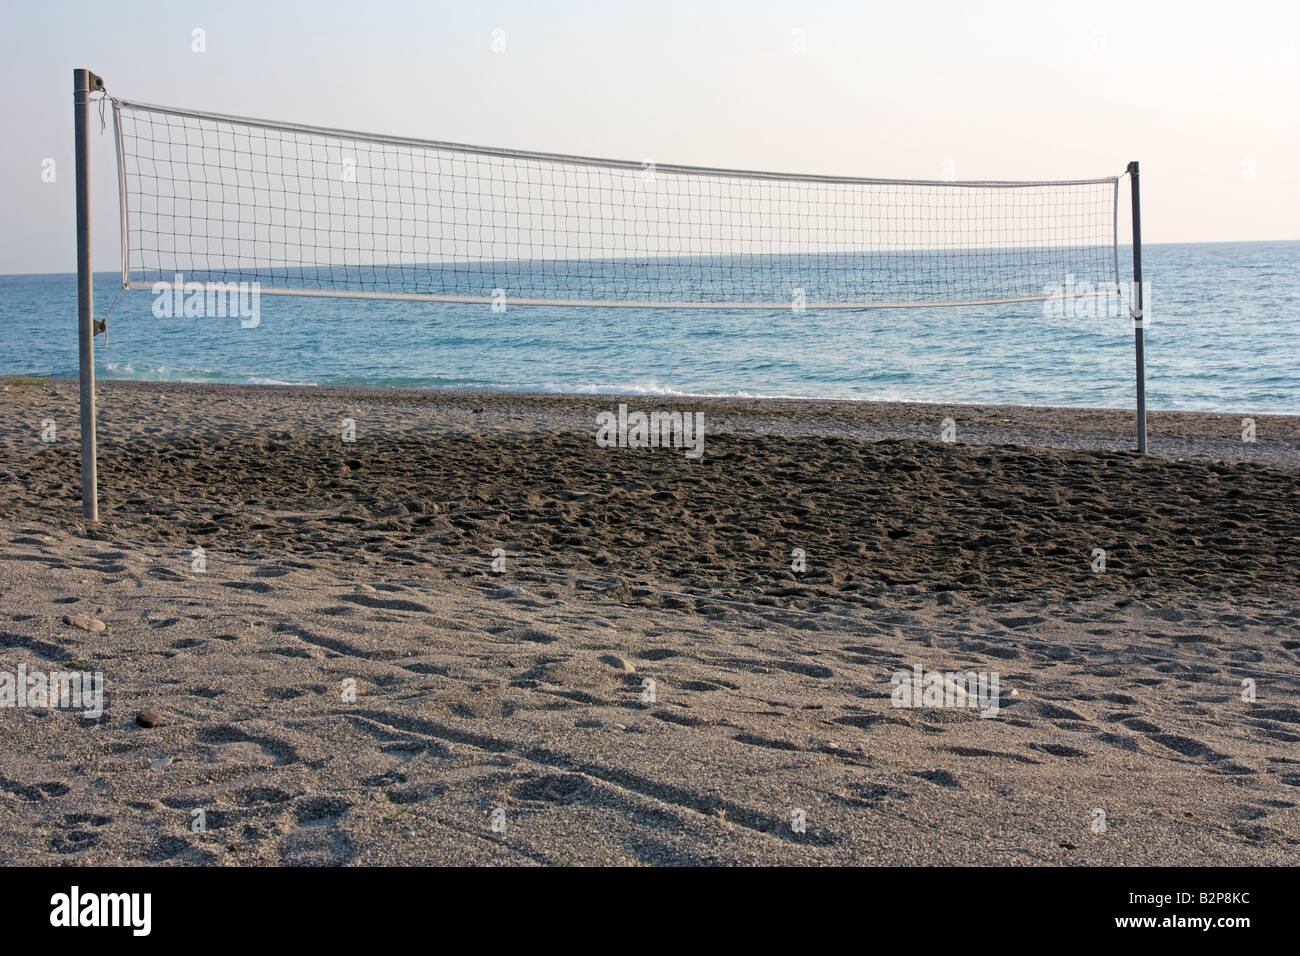 The net of a beach volleyball field Stock Photo